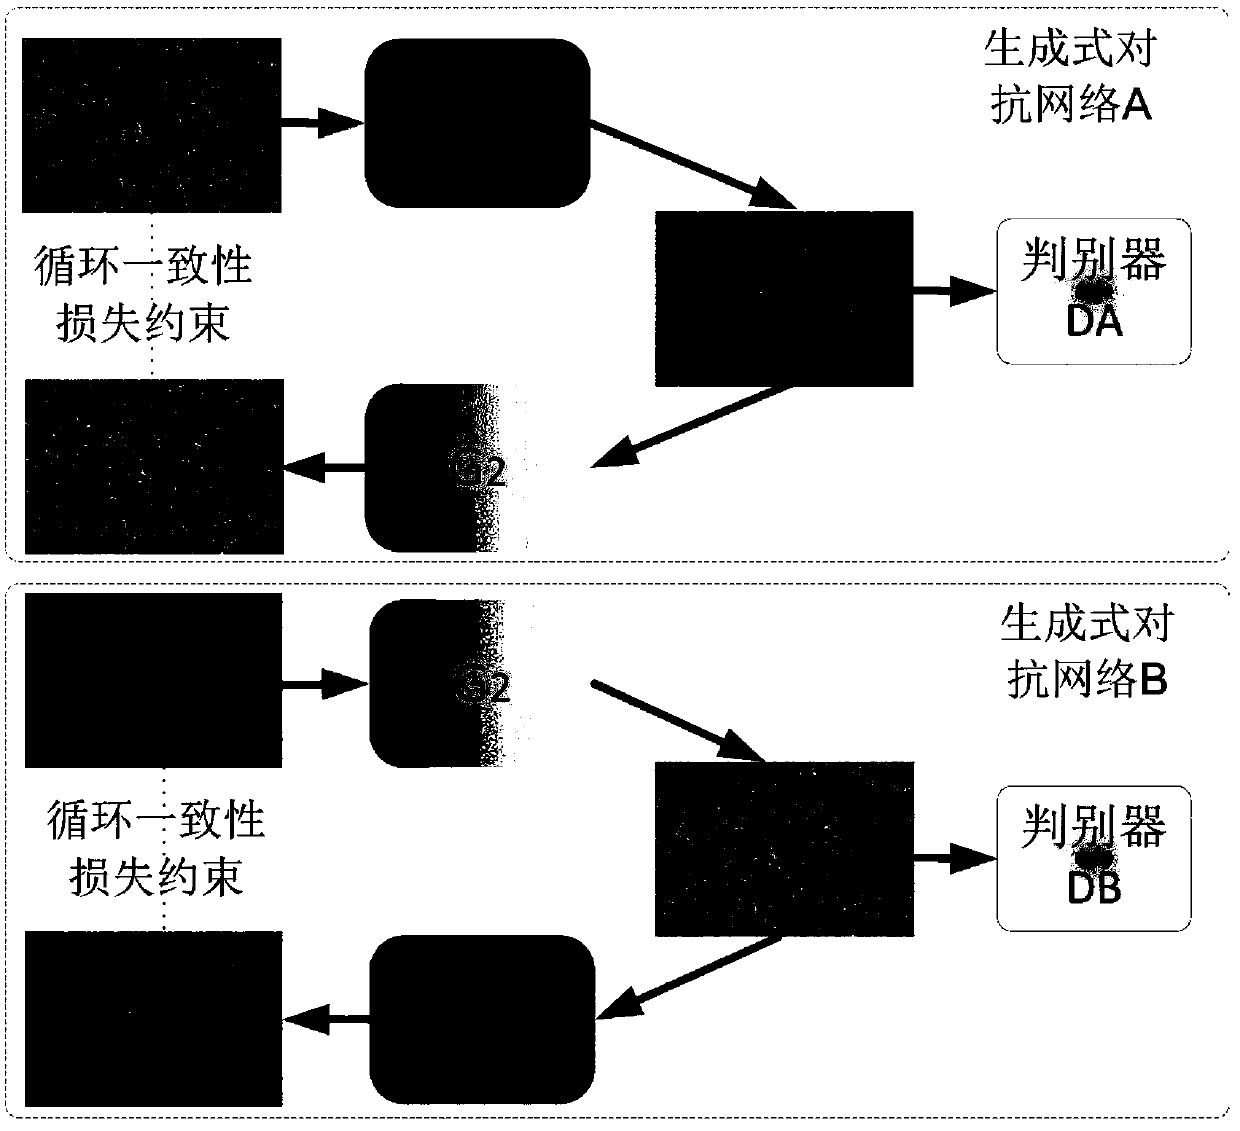 A mineral flotation foam image color correction method and a foam color detection system